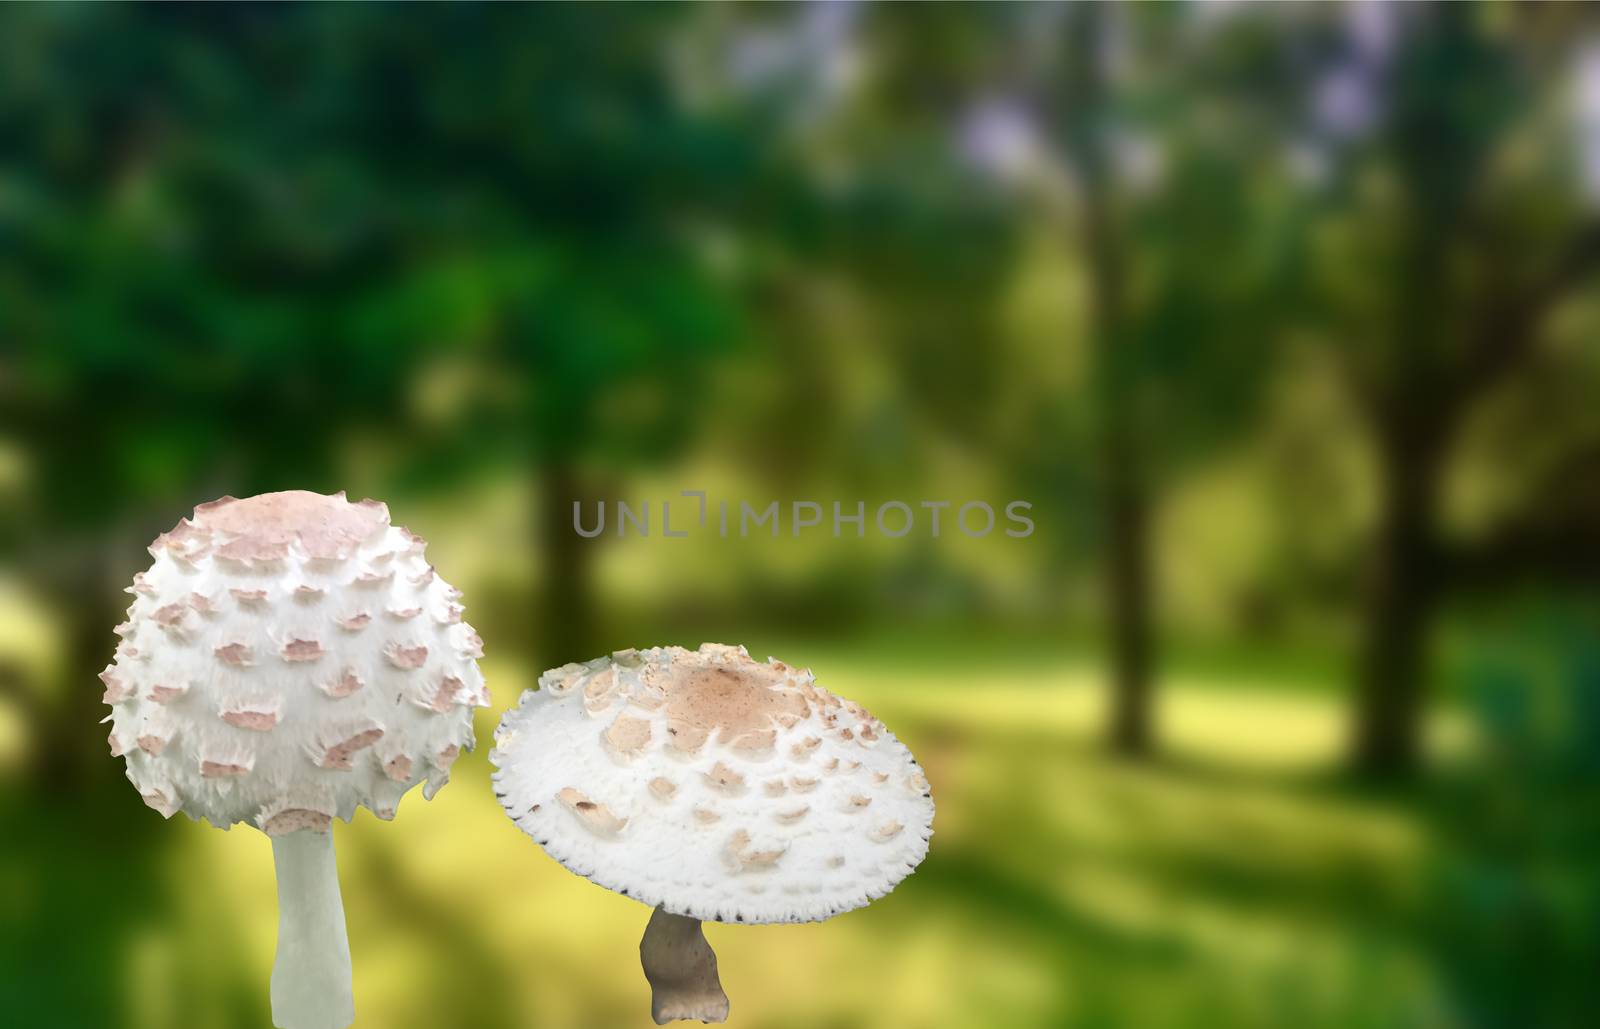 Poison flu in the forest. Poisonous mushrooms white fly agaric in outdoor blurred background. 